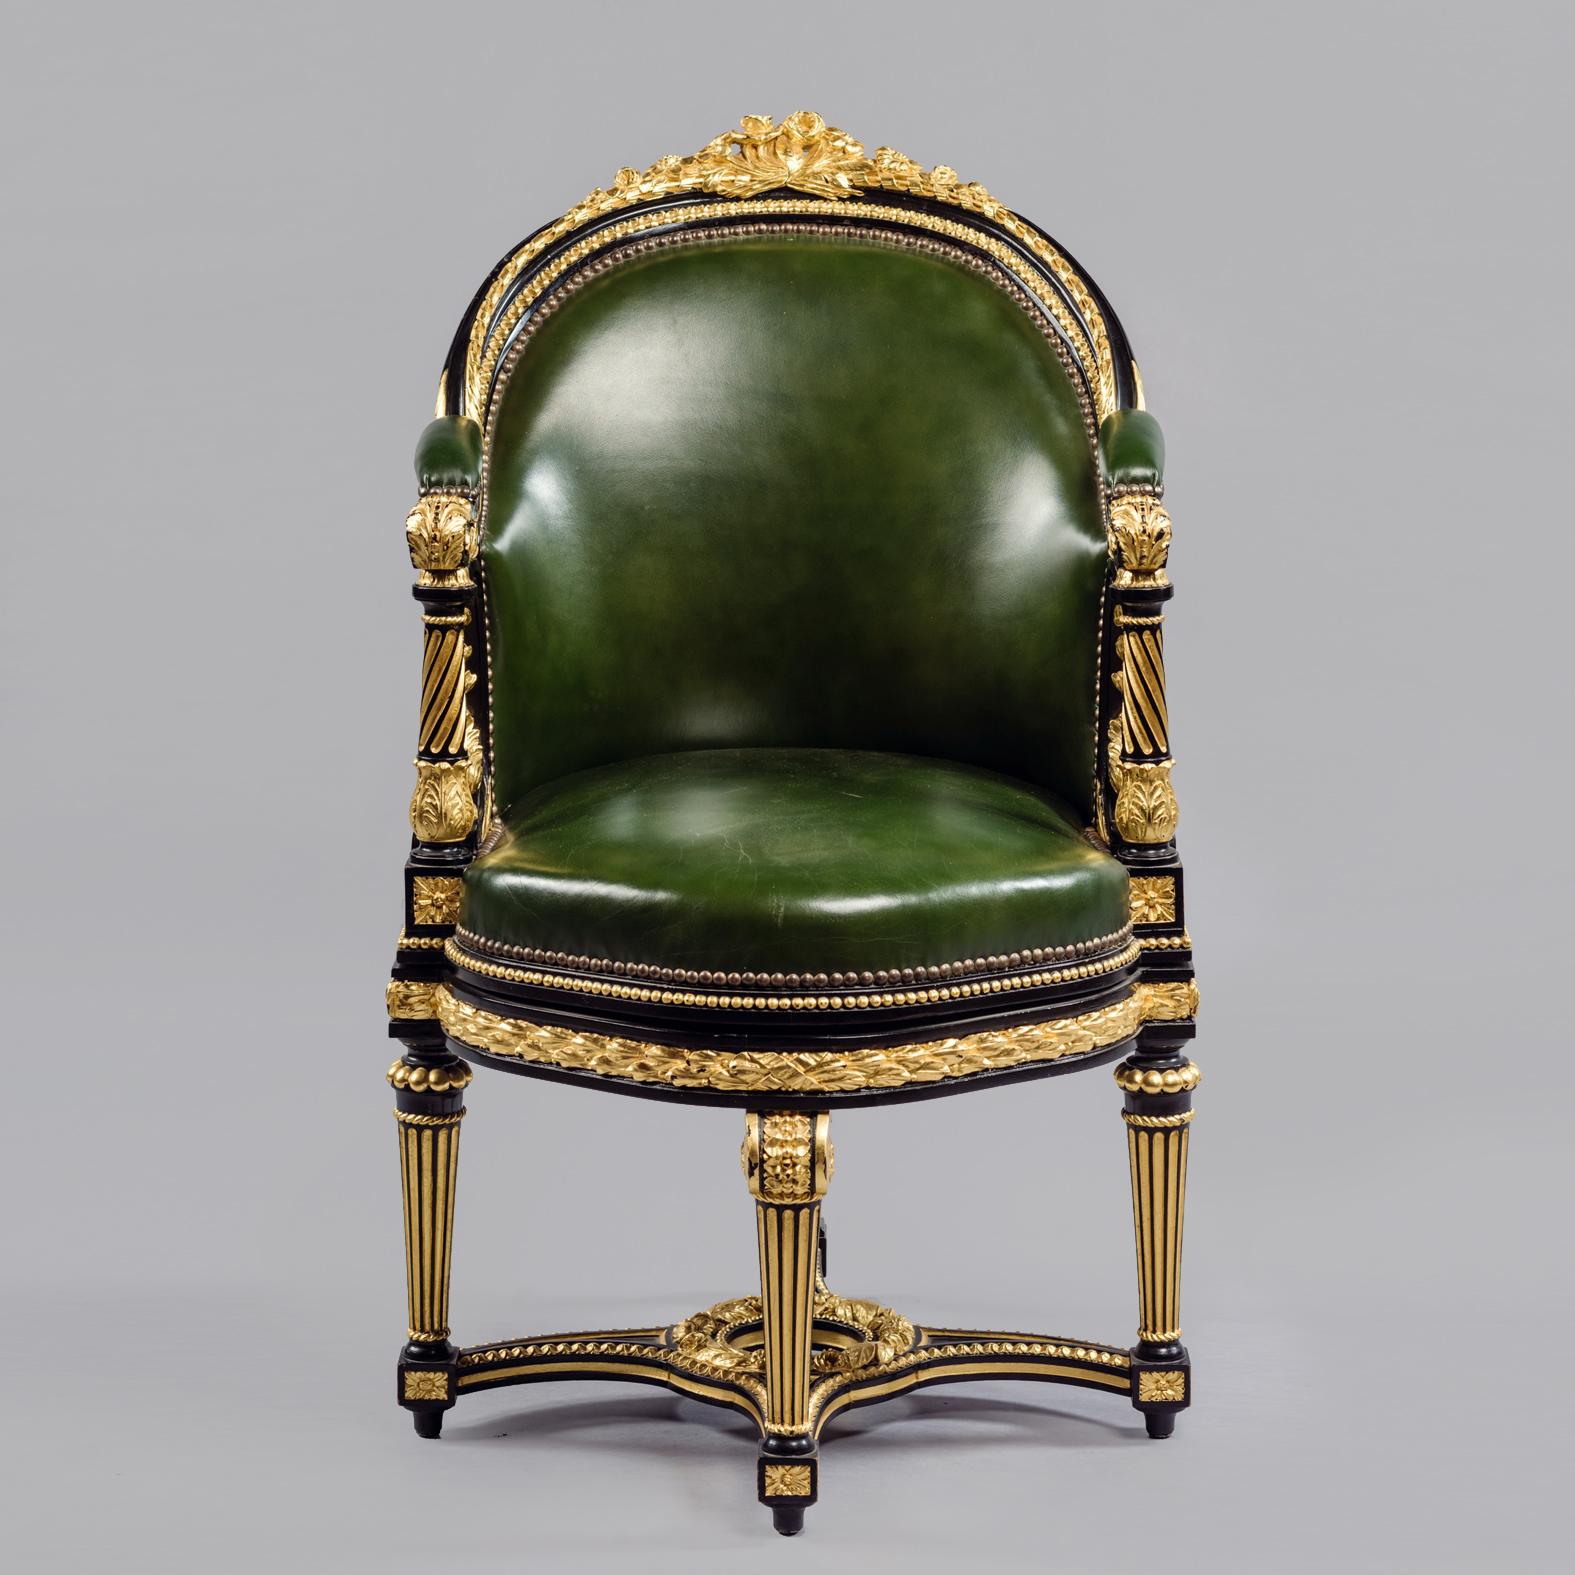 French Louis XVI Style Rotating Desk Chair Upholstered in Green Leather